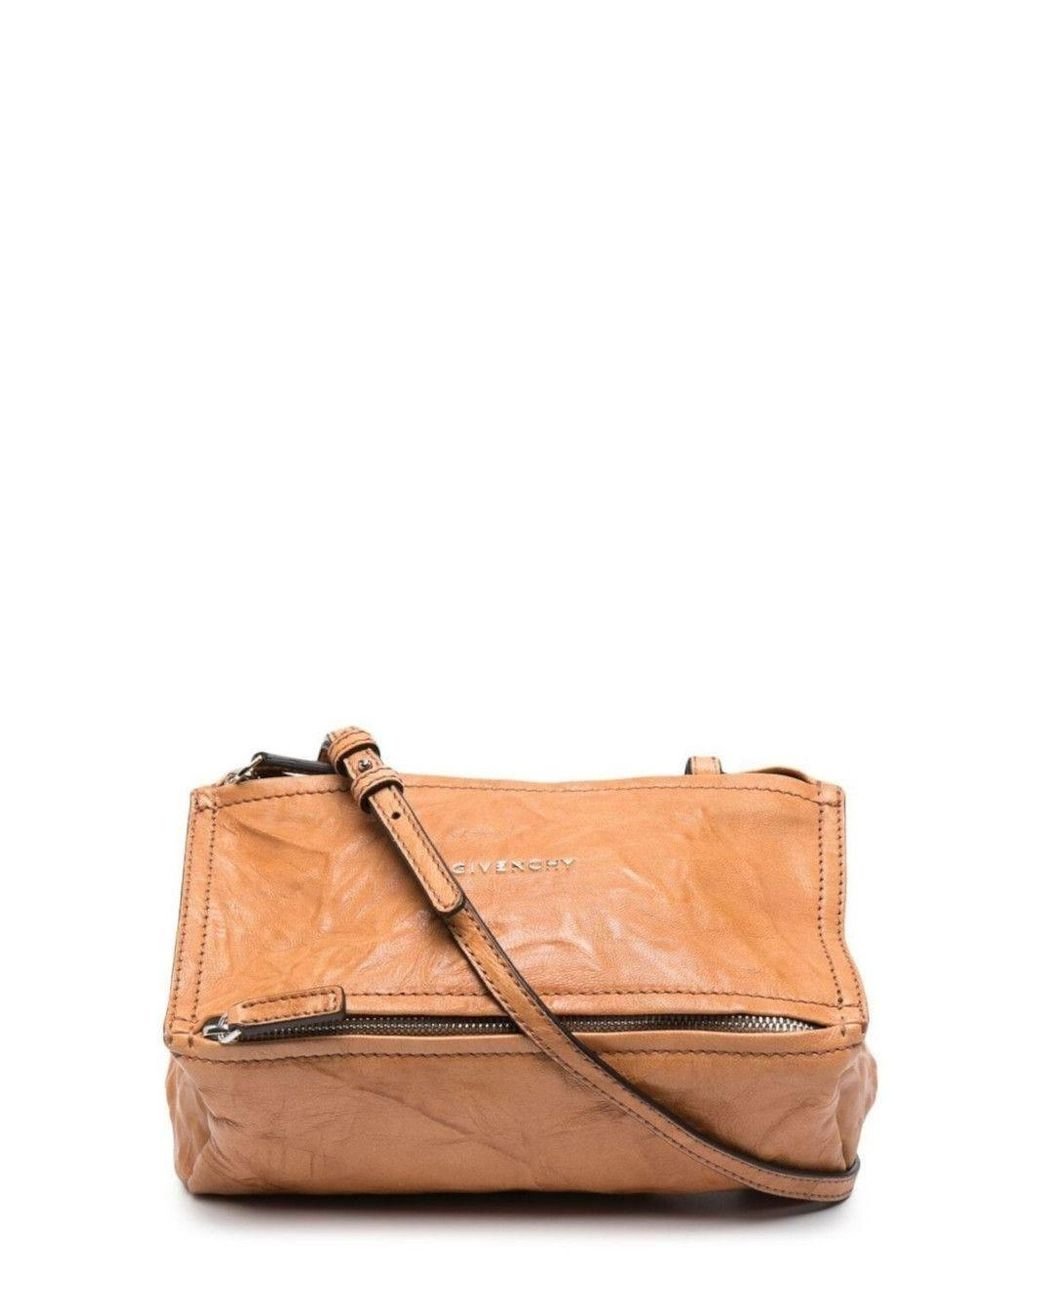 Givenchy Brown Mini Pandora Bag In Aged Leather | Lyst